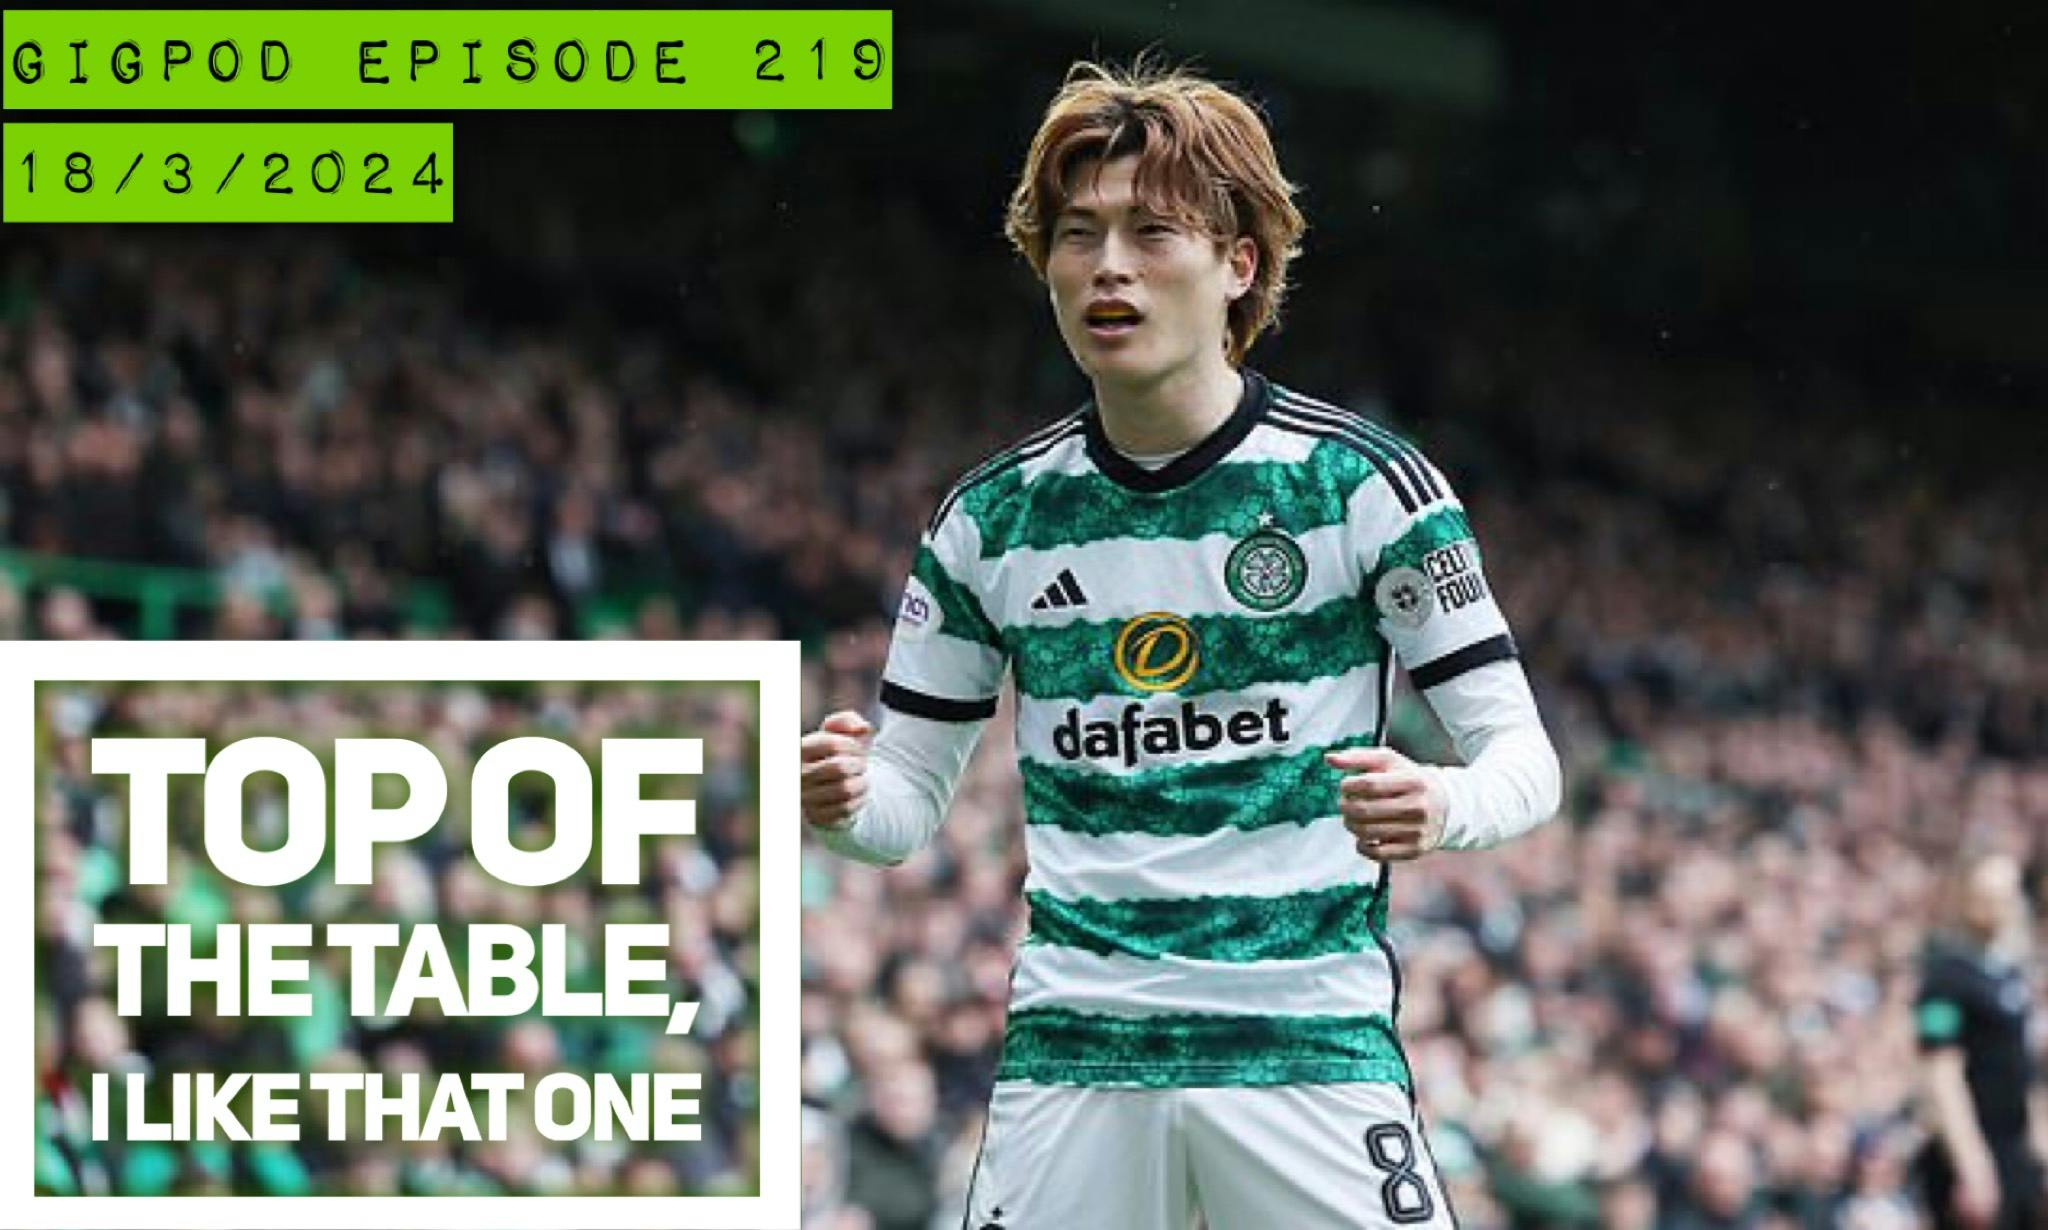 GIGPOD EP 219: TOP OF THE LEAGUE, I LIKE THAT ONE